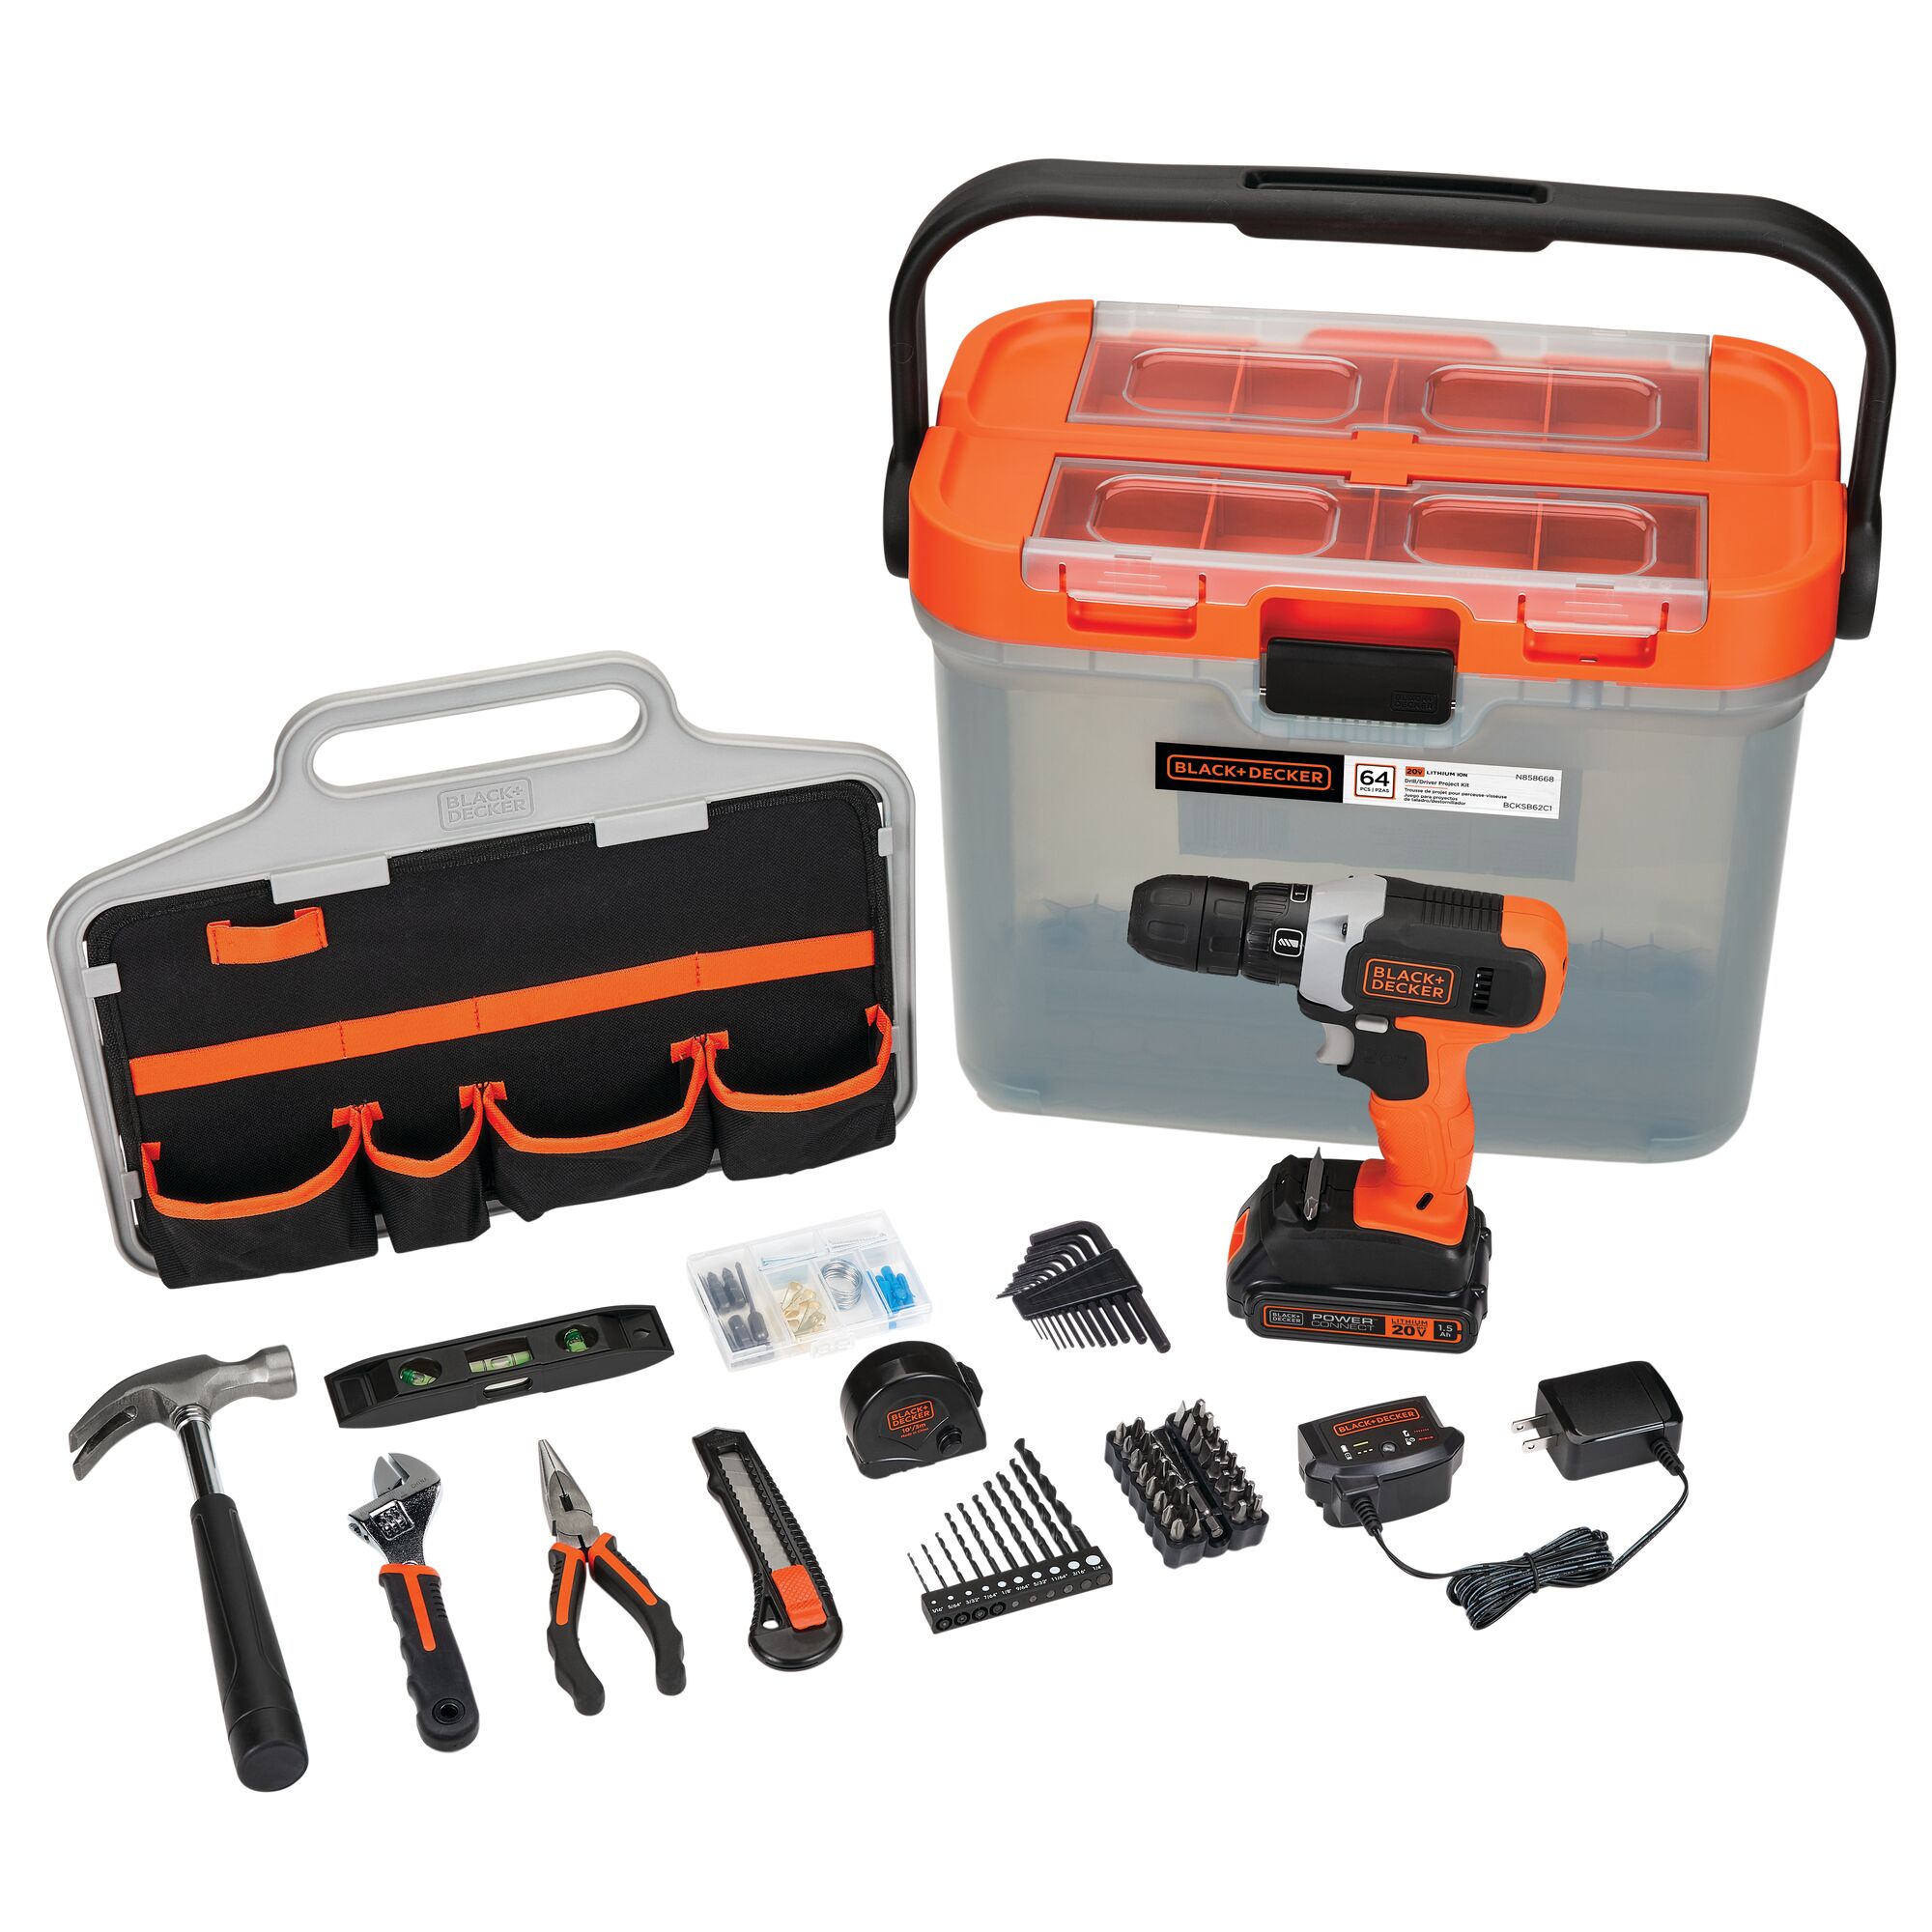 20 volt max drill with 63 piece hand tool and accessory home project kit.